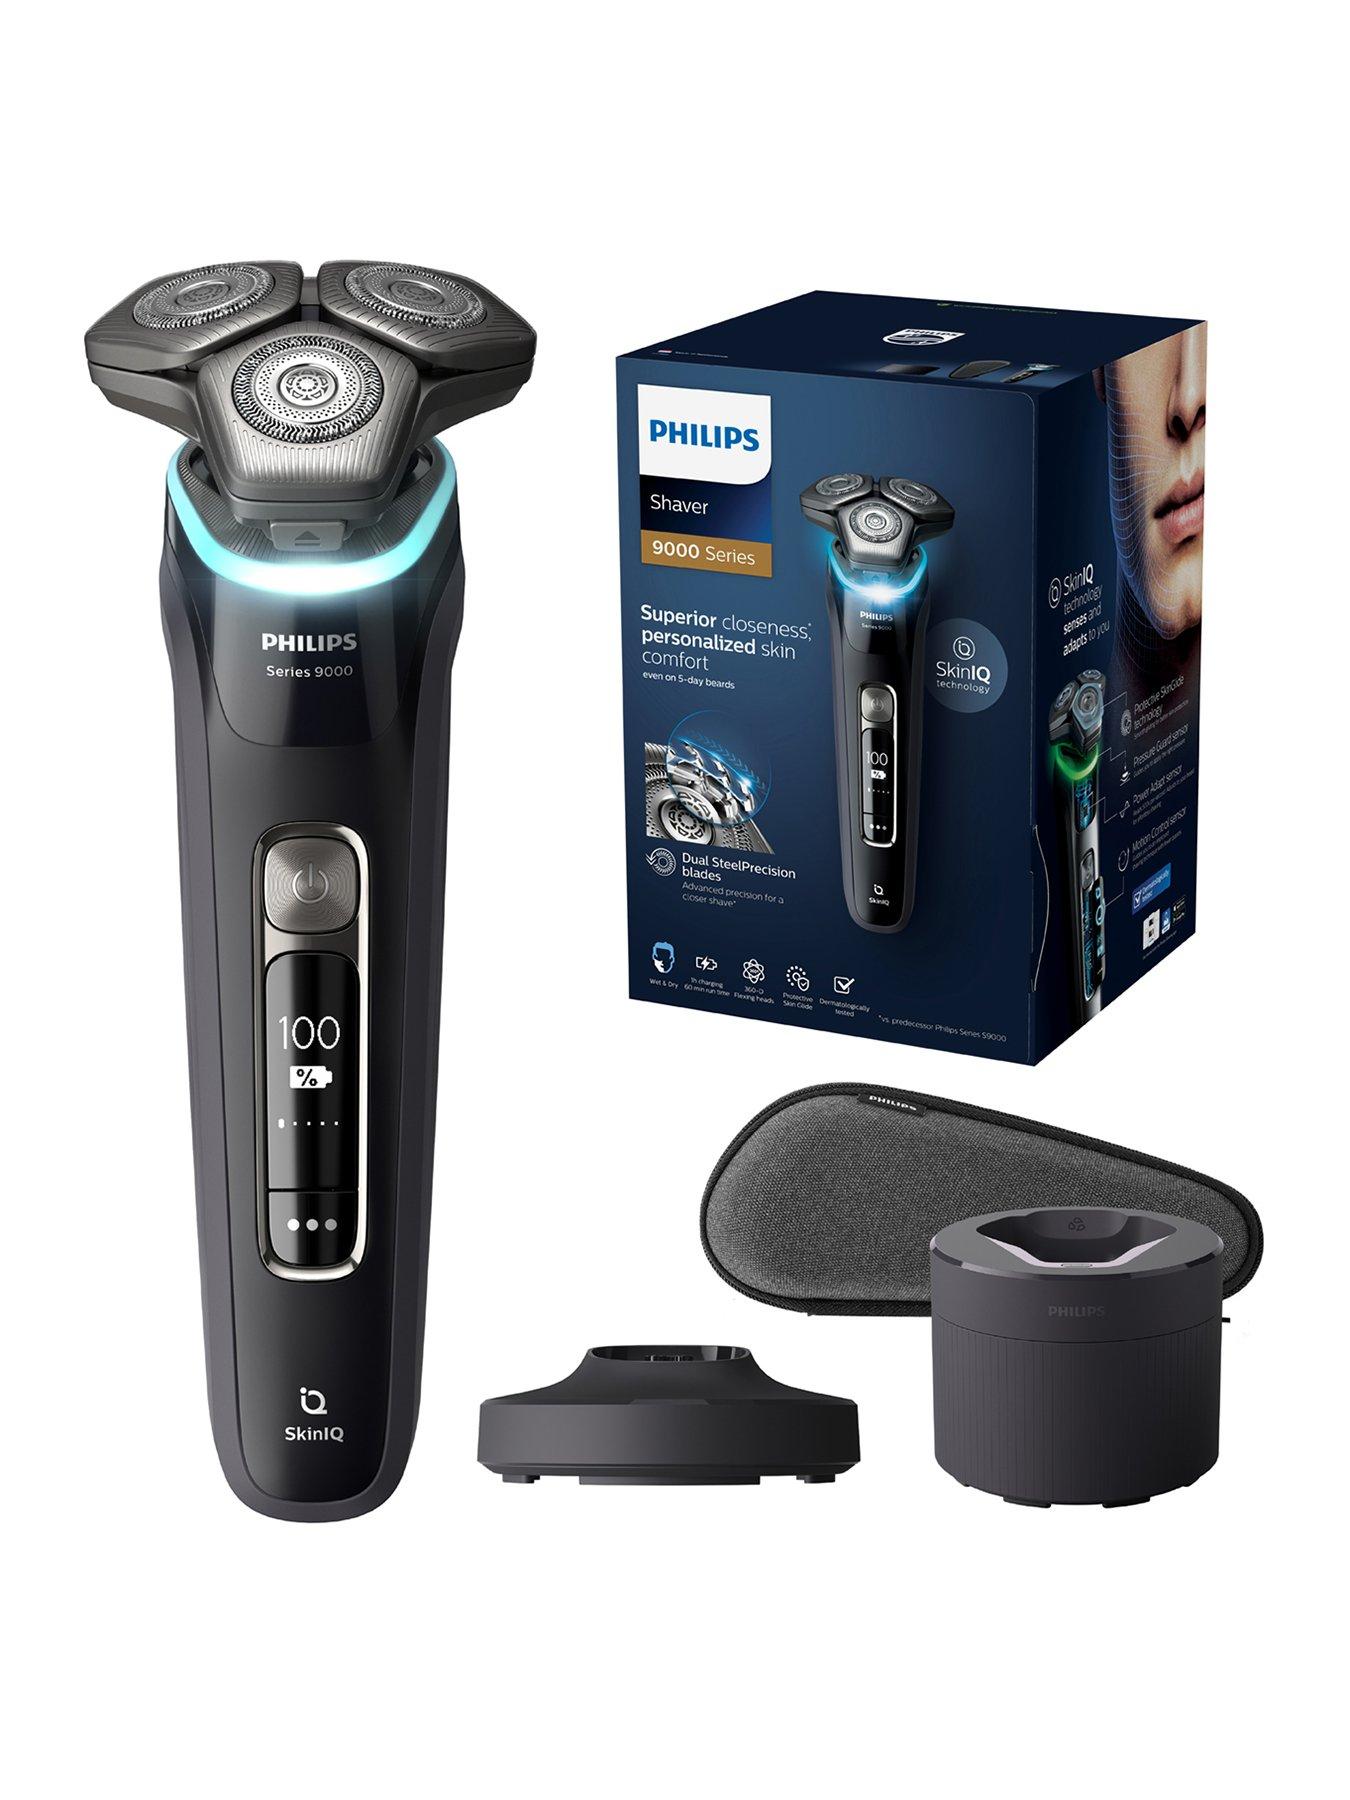 Philips Series 9000 Wet & Dry Men's Electric Shaver with Charging